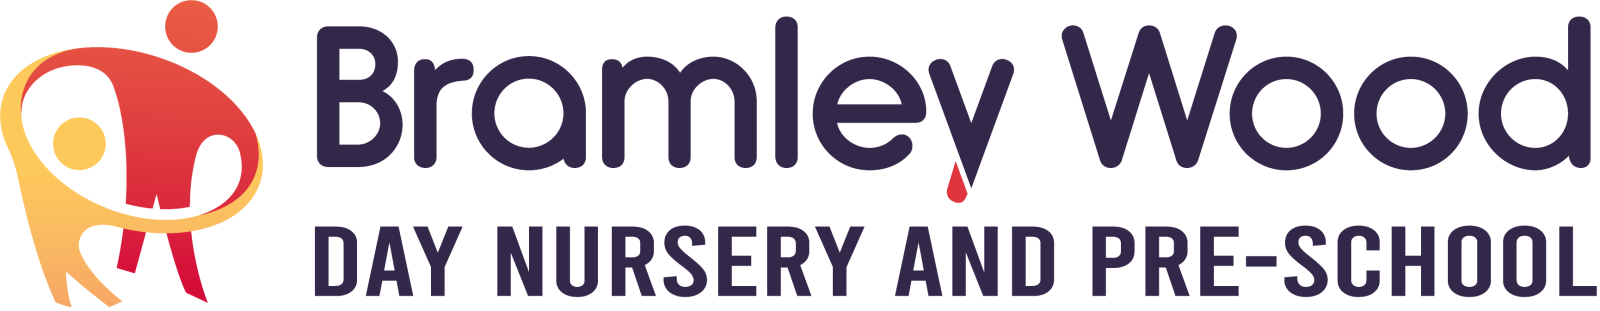 Bramley Wood Day Nursery | Complete Childcare